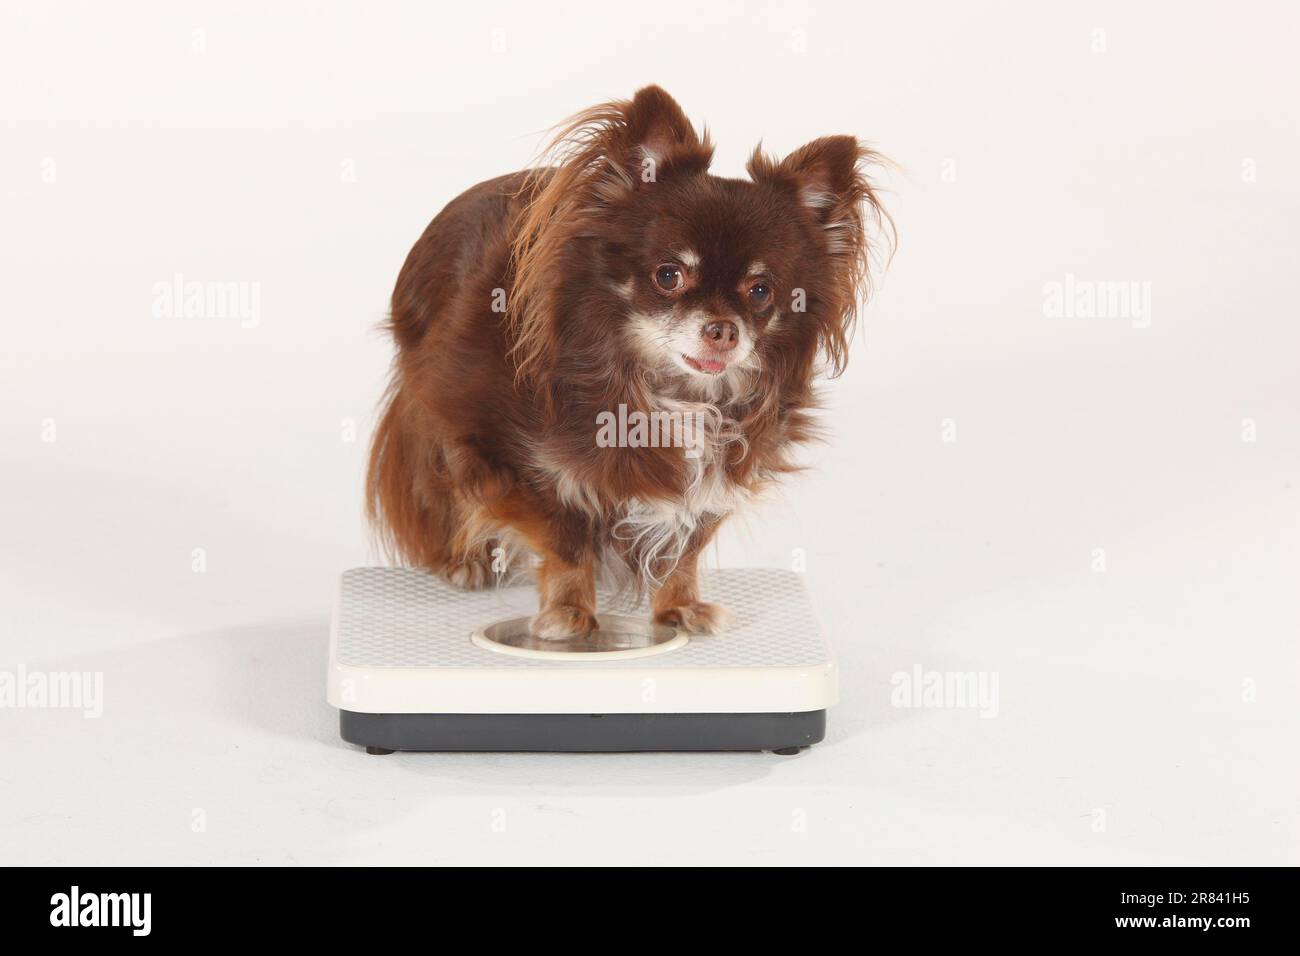 Chihuahua, long-haired, on scales Stock Photo